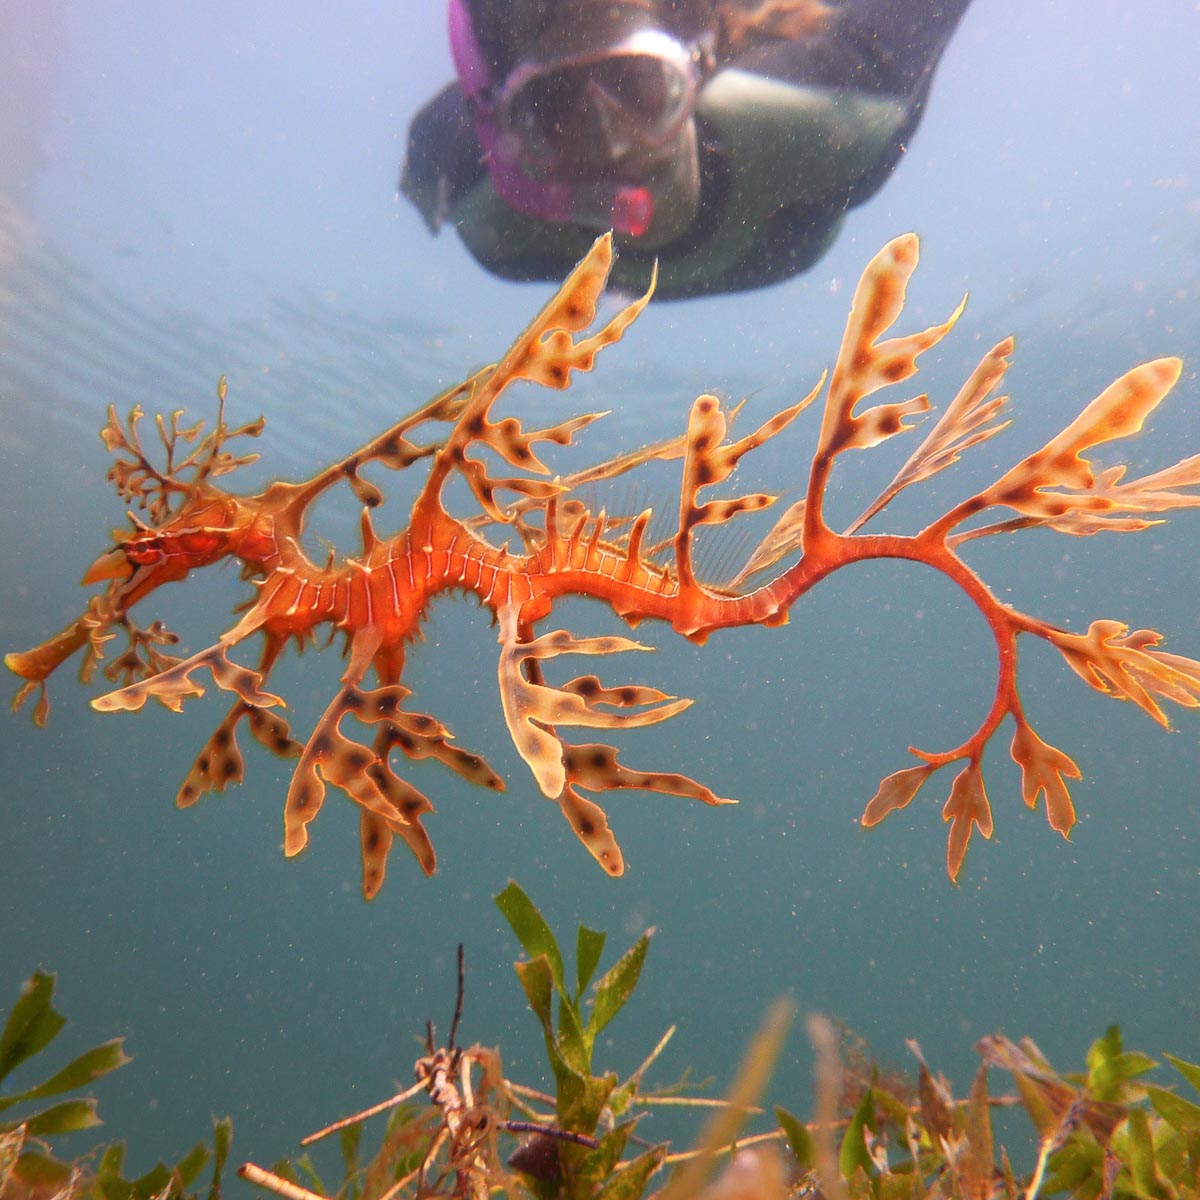 Snorkel with Seadragons to Celebrate Festival of Nature - 8th October